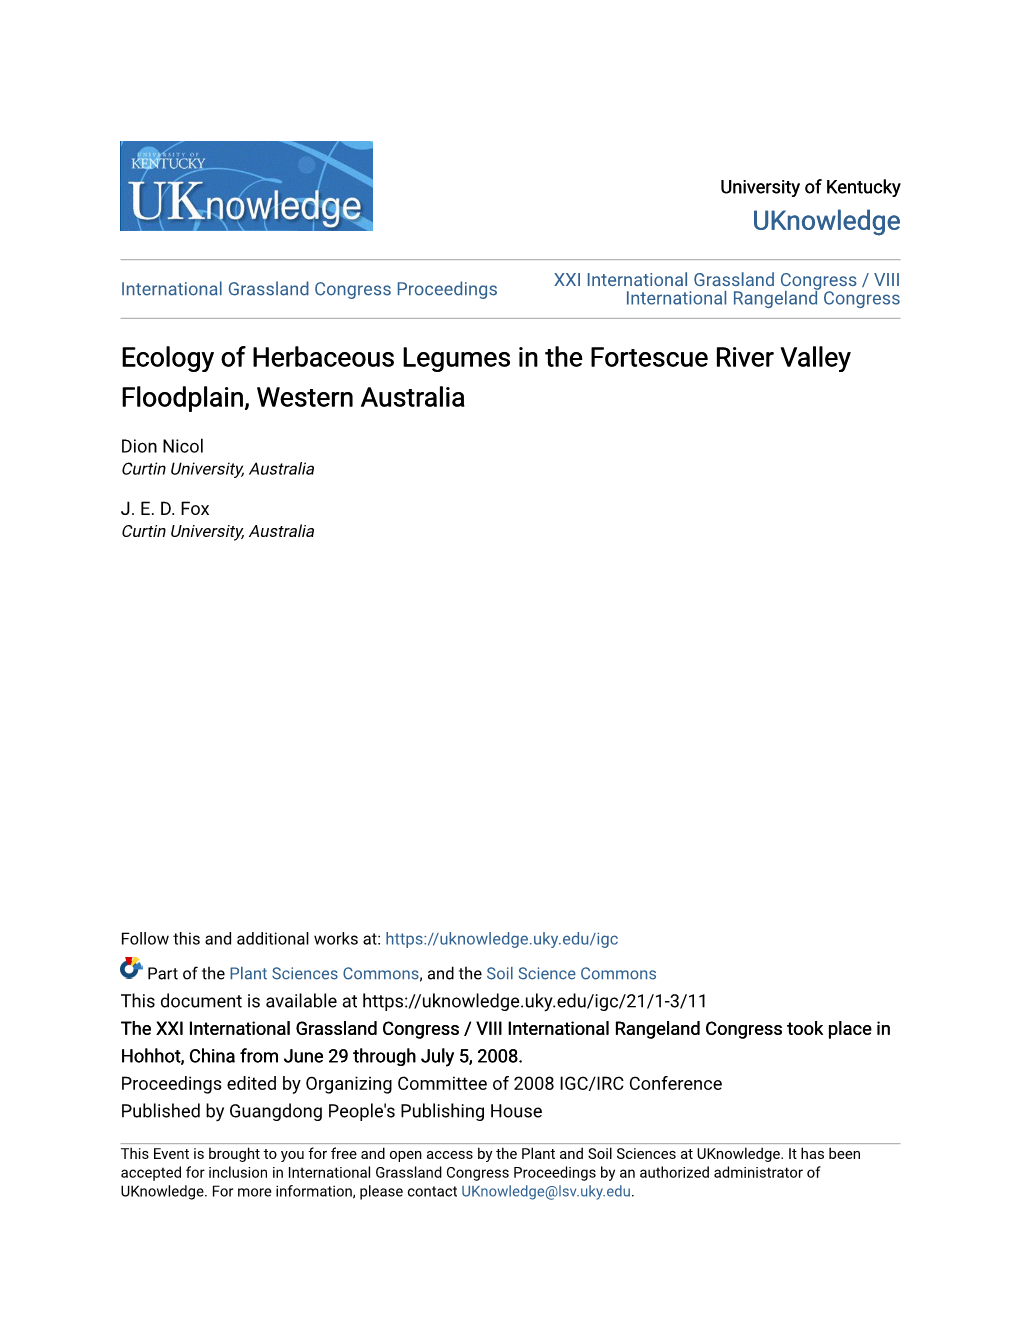 Ecology of Herbaceous Legumes in the Fortescue River Valley Floodplain, Western Australia